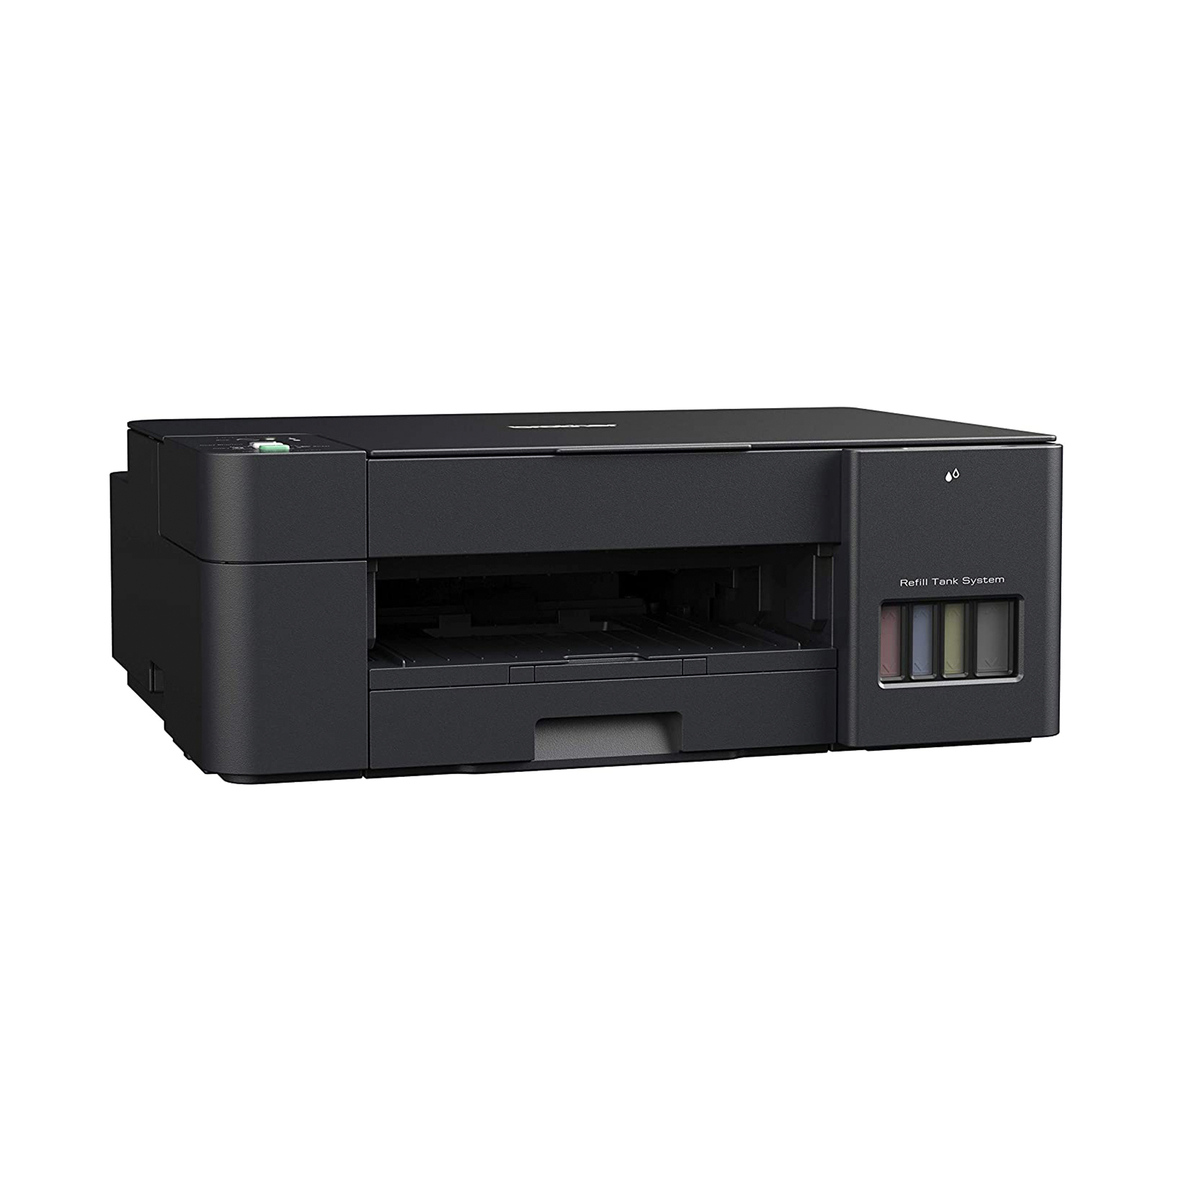 Brother All-in One Ink Tank Printer DCPT220